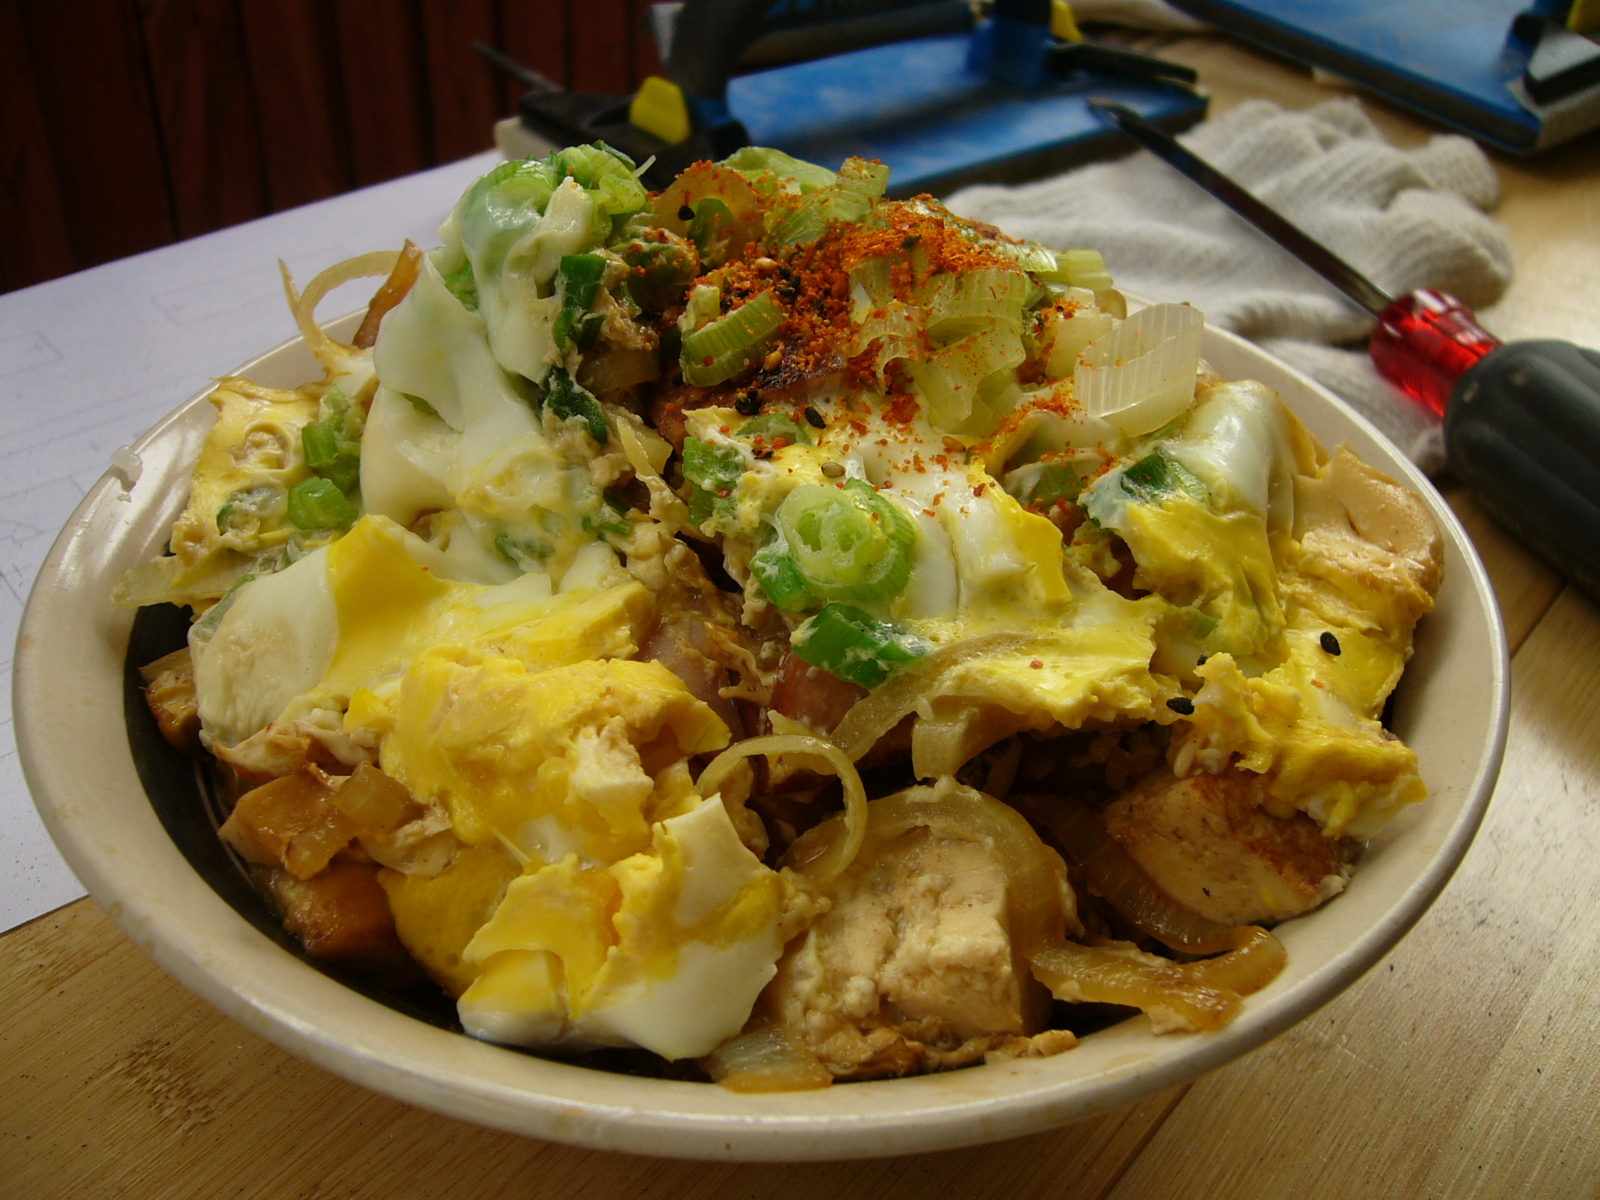 an asian noodle dish is shown in a bowl on a table